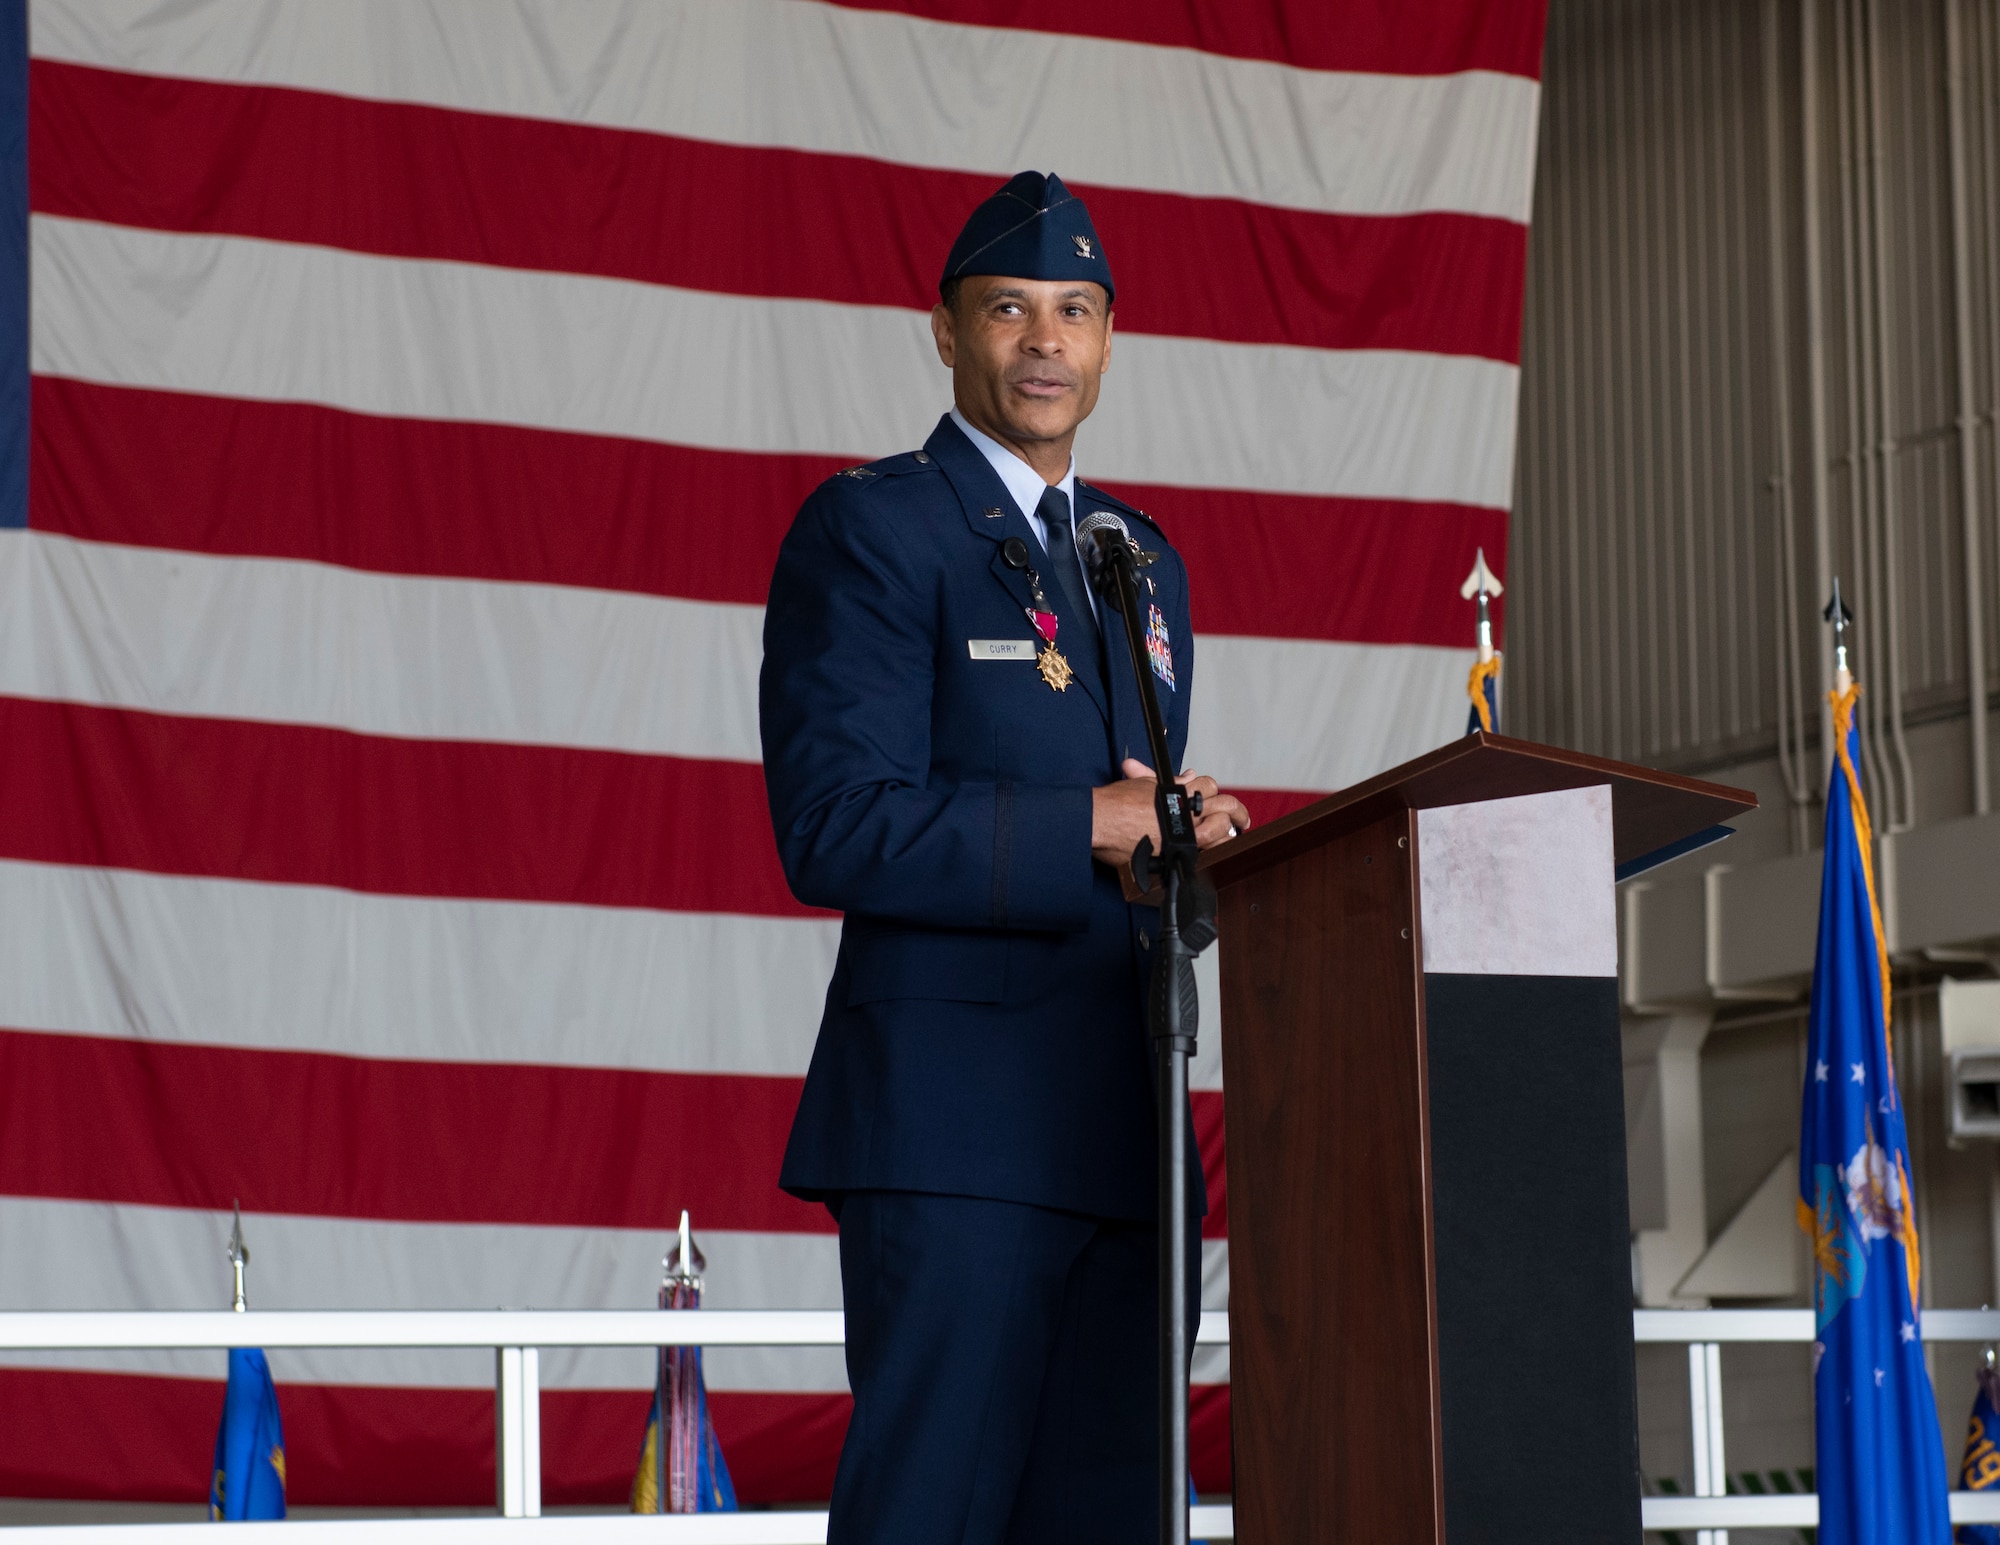 A man in a blue uniform speaks at a podium in front of an American flag.